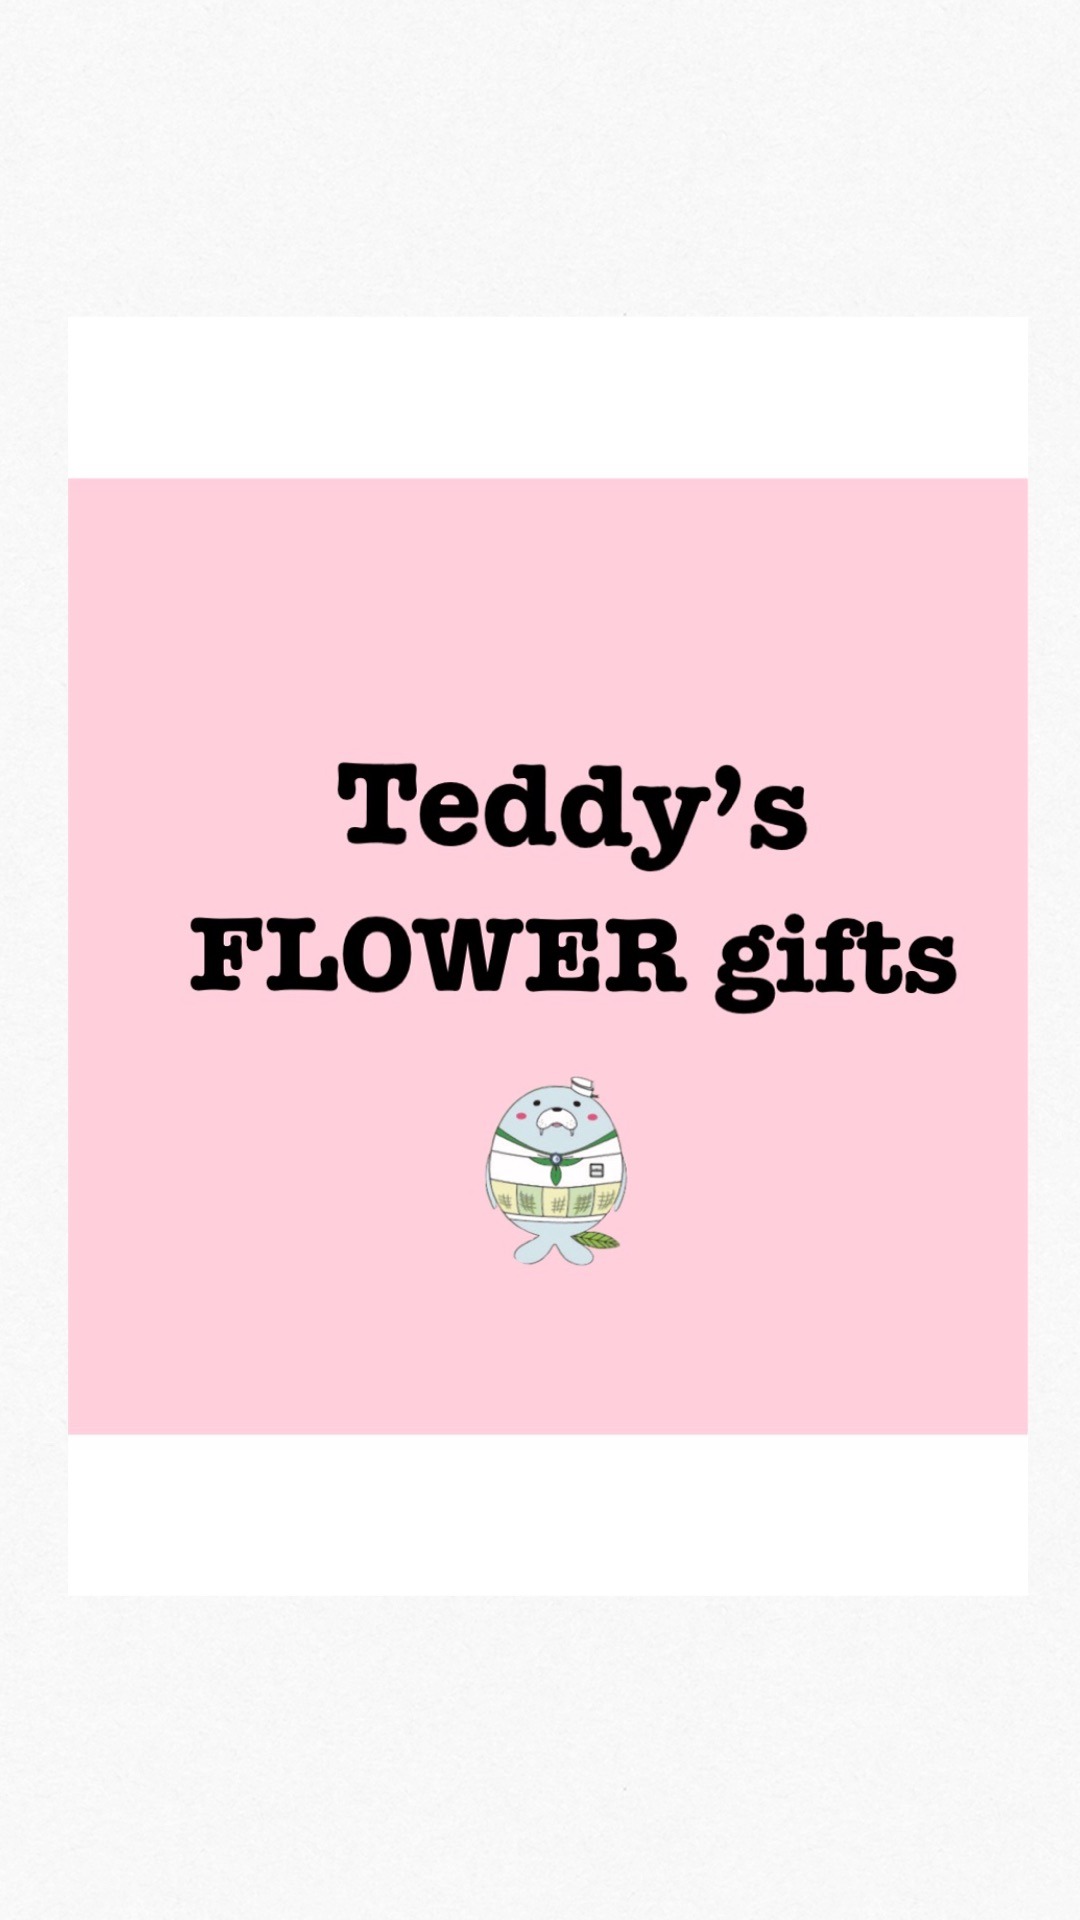 Teddy’s FLOWER gifts